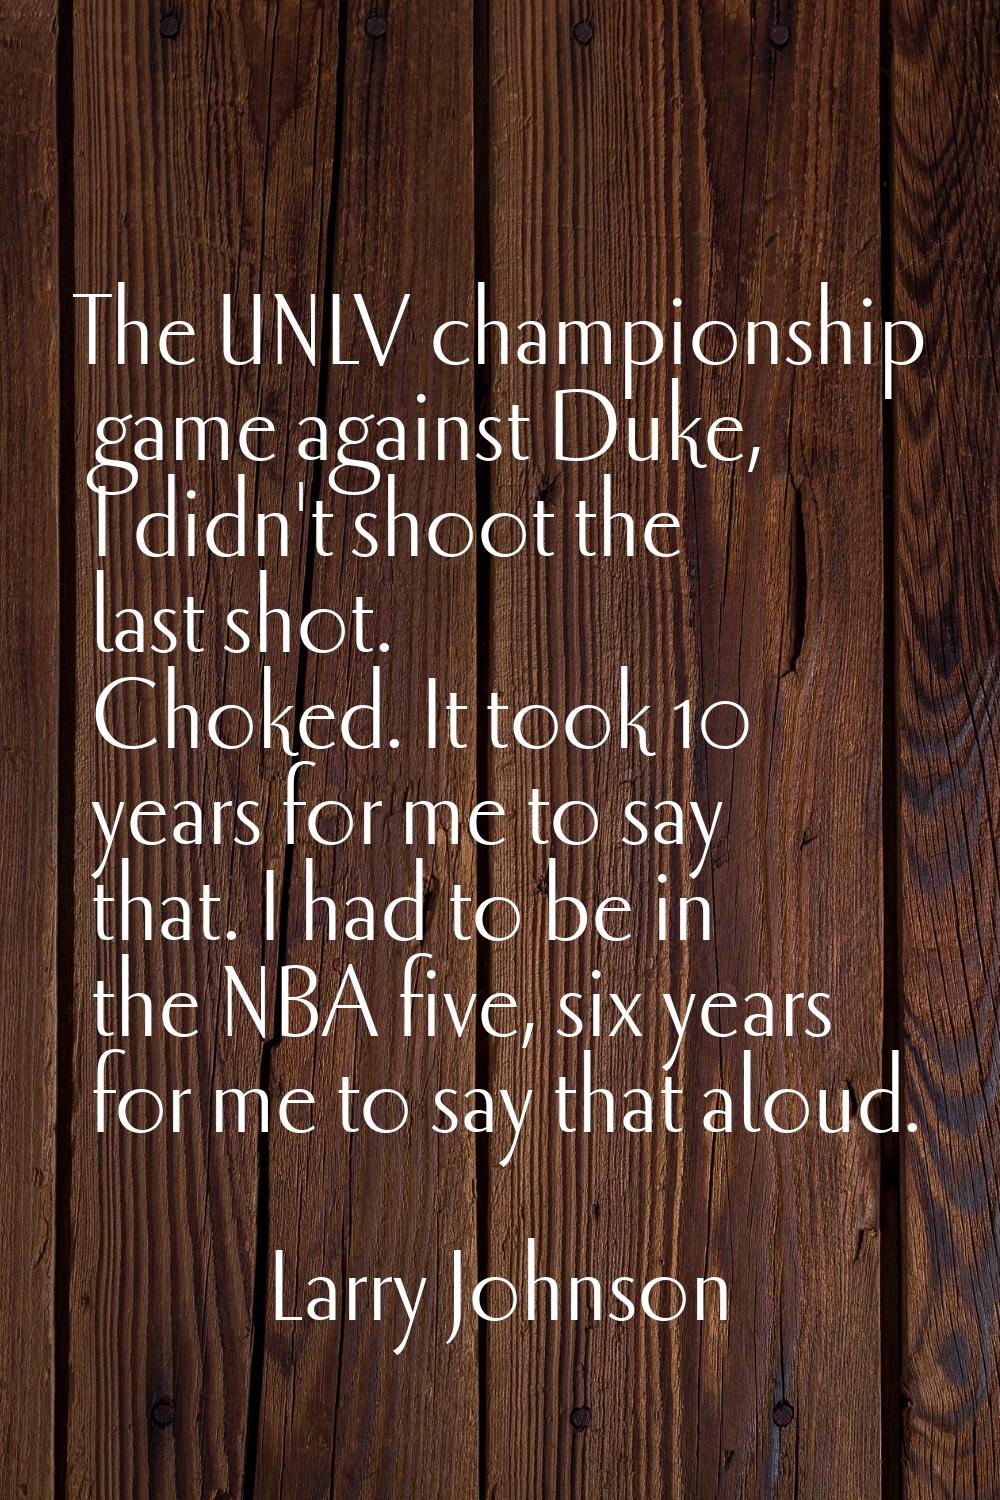 The UNLV championship game against Duke, I didn't shoot the last shot. Choked. It took 10 years for